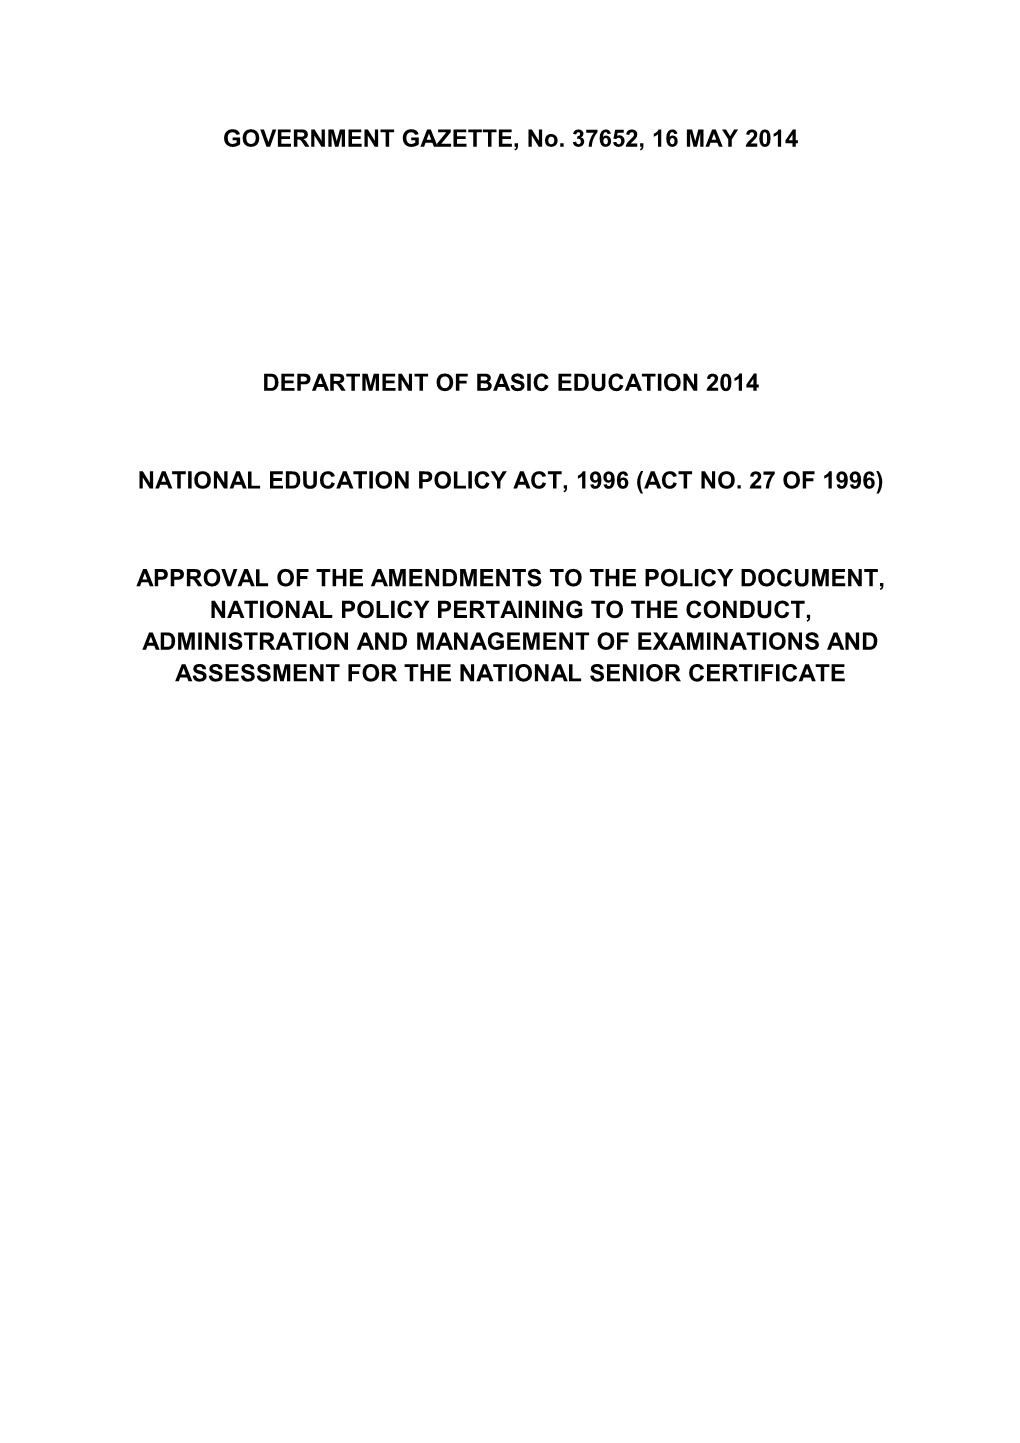 National Education Policy Act, 1996 (Act No. 27 of 1996)